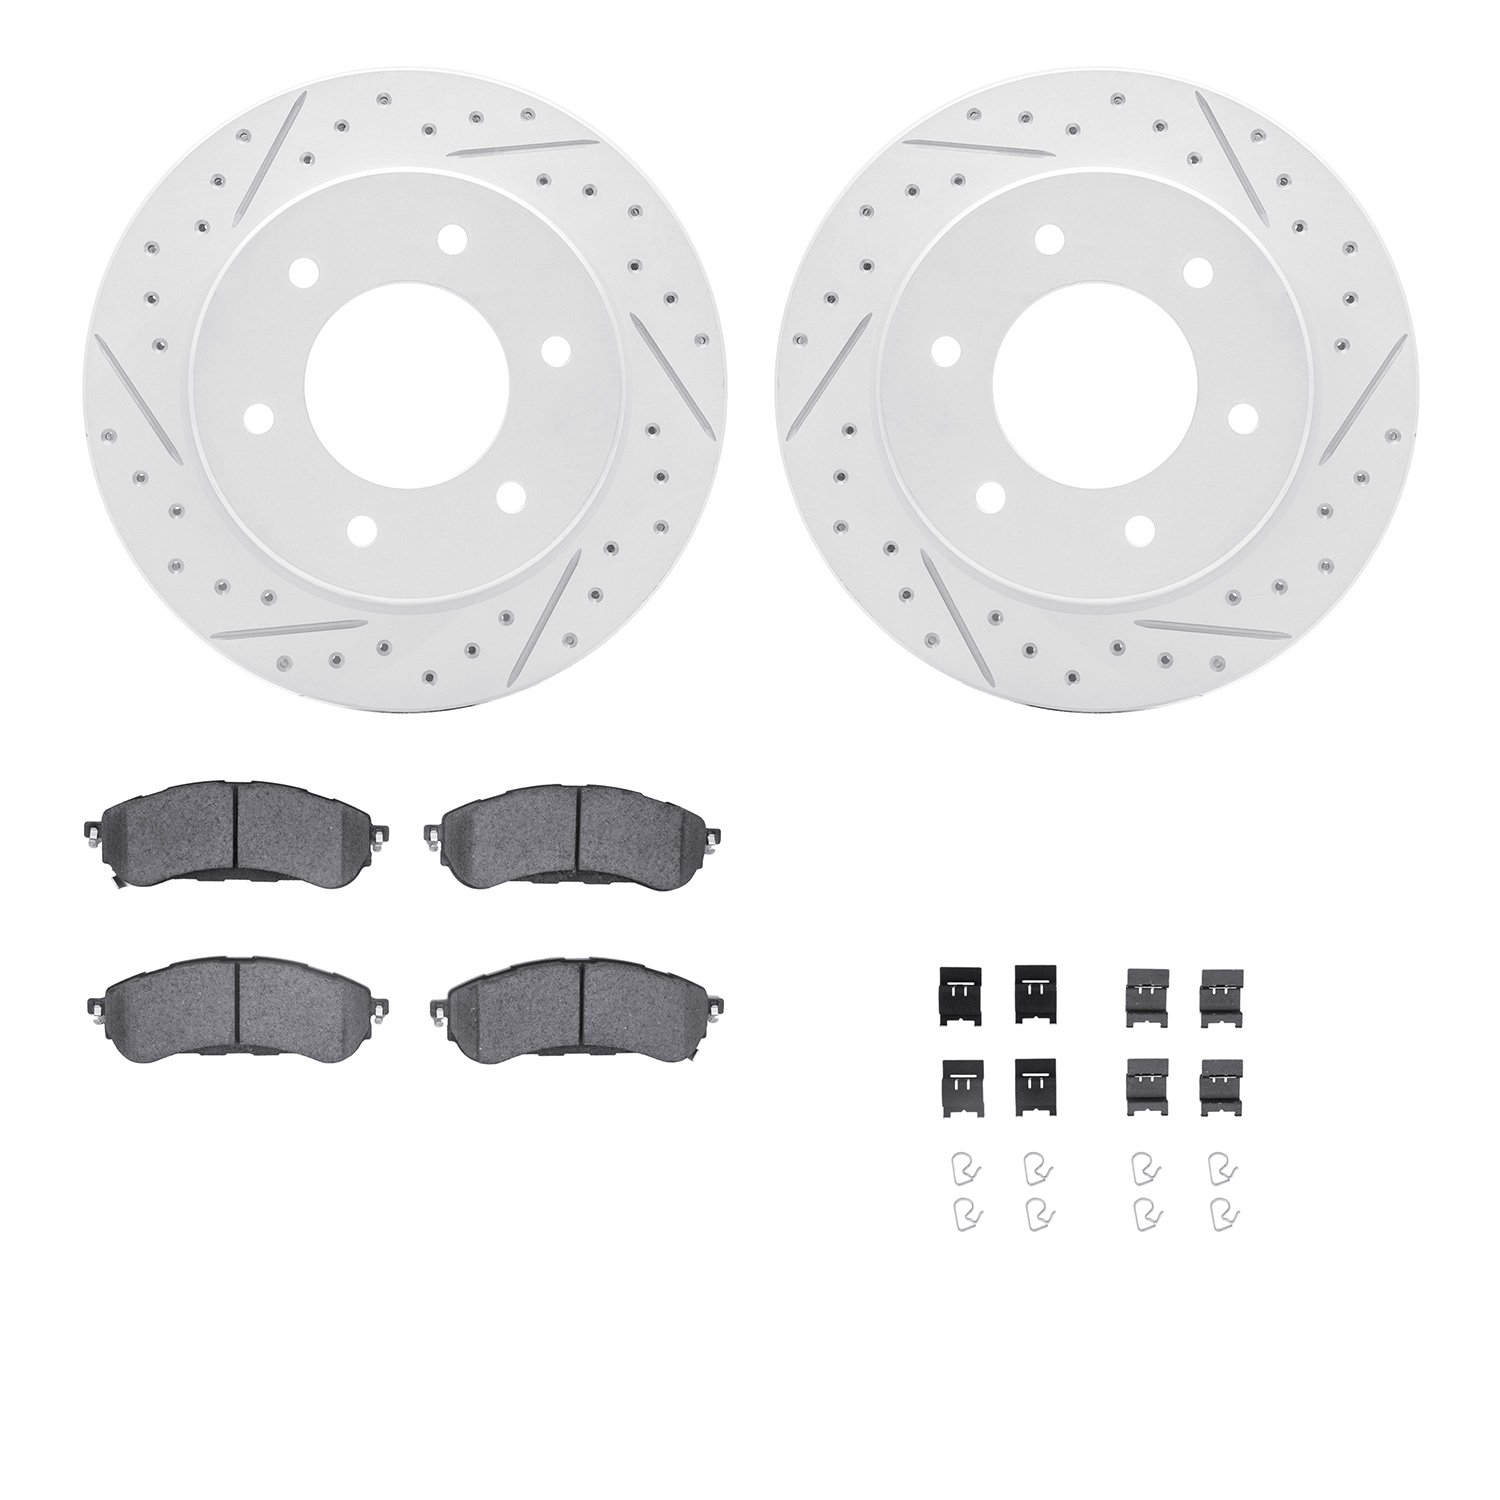 2512-54172 Geoperformance Drilled/Slotted Rotors w/5000 Advanced Brake Pads Kit & Hardware, Fits Select Ford/Lincoln/Mercury/Maz